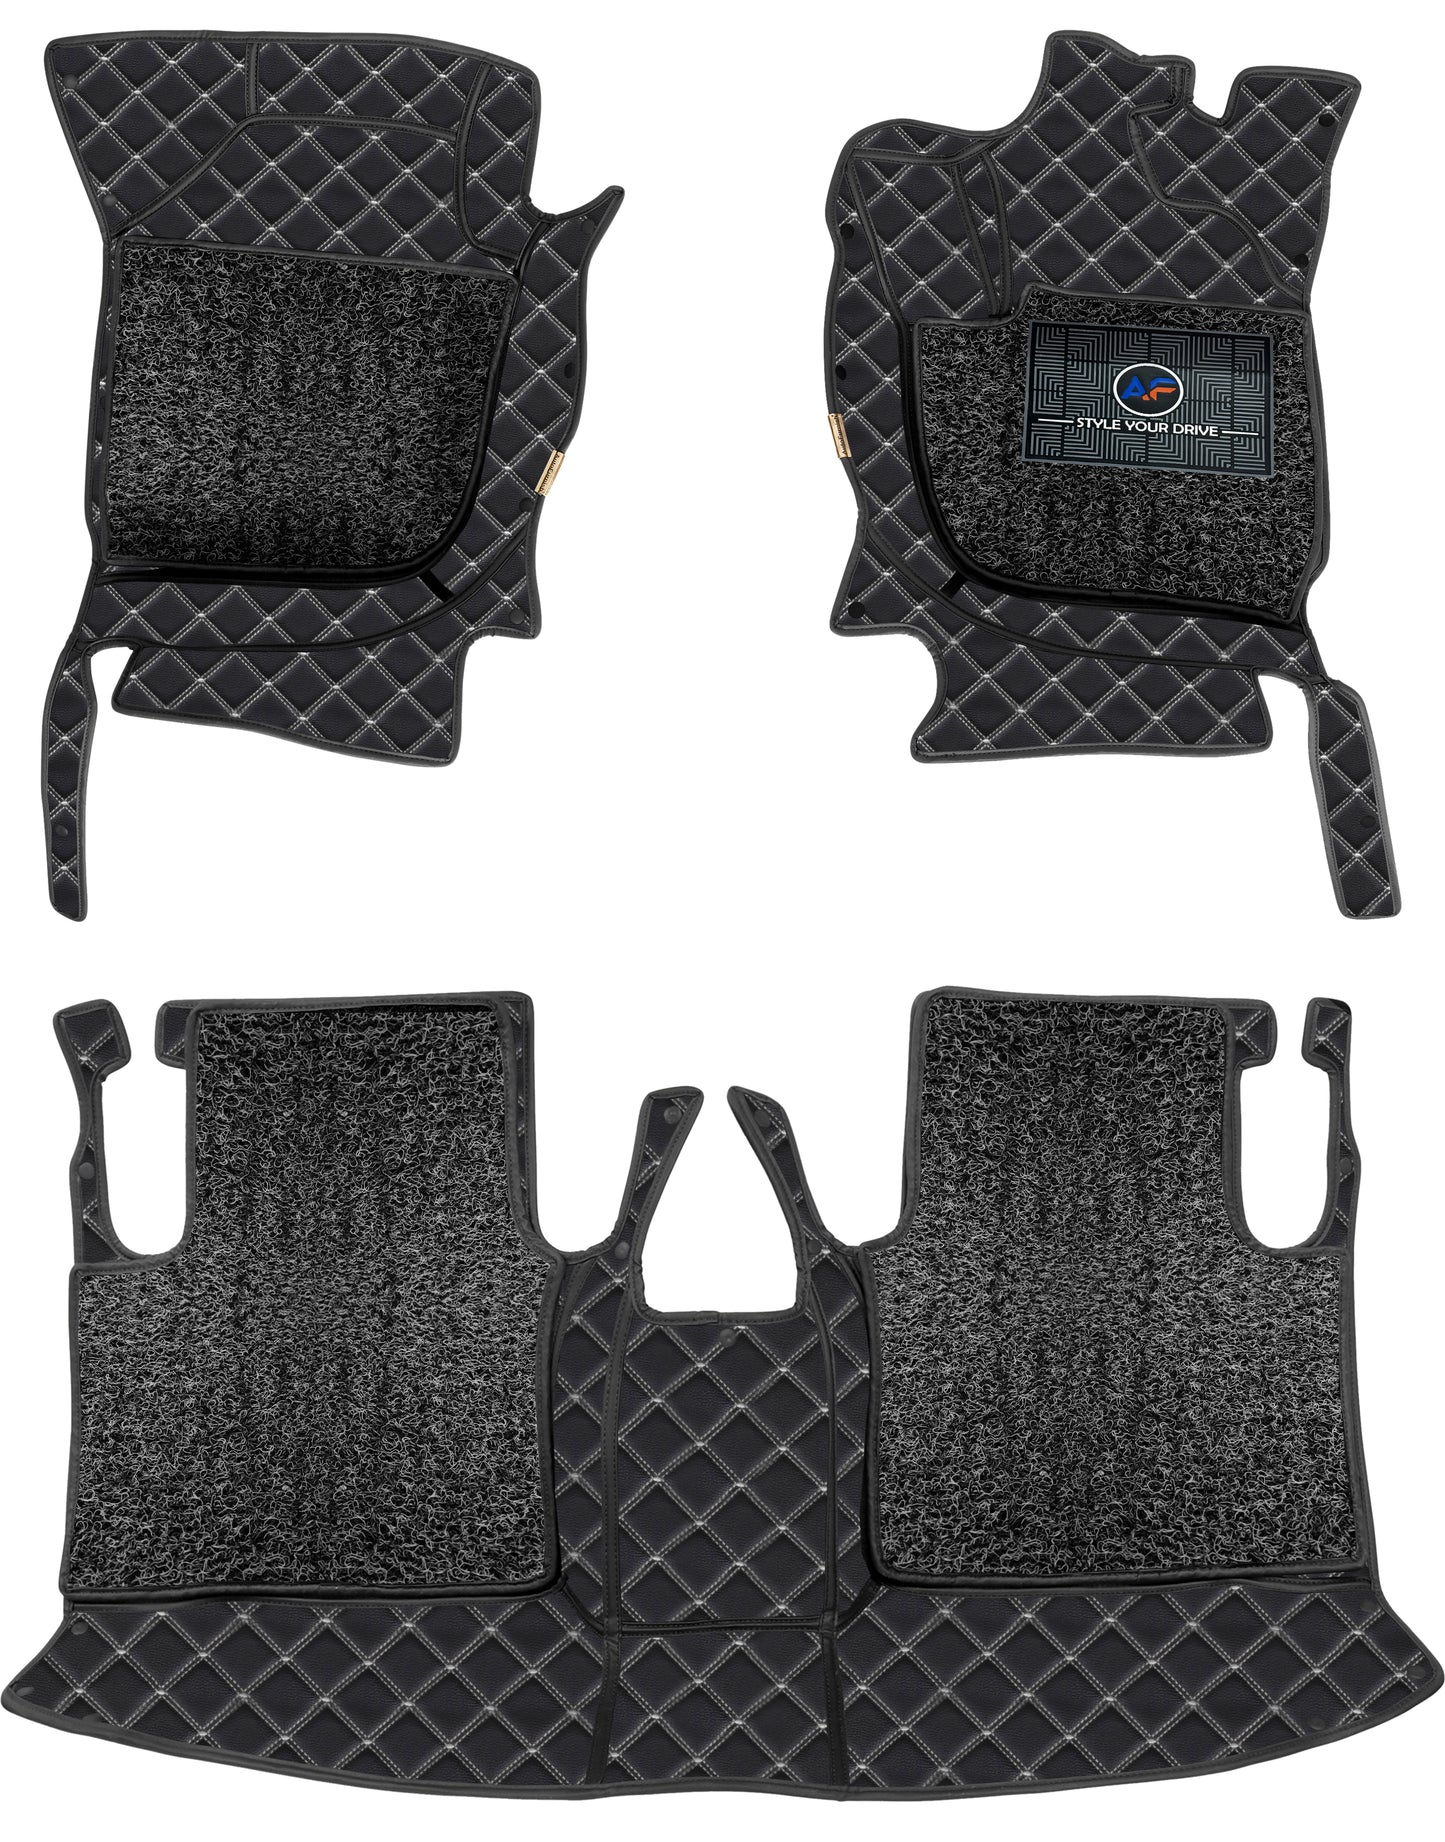 Volvo S60 2022-7D Luxury Car Mat, All Weather Proof, Anti-Skid, 100% Waterproof & Odorless with Unique Diamond Fish Design (24mm Luxury PU Leather, 2 Rows)